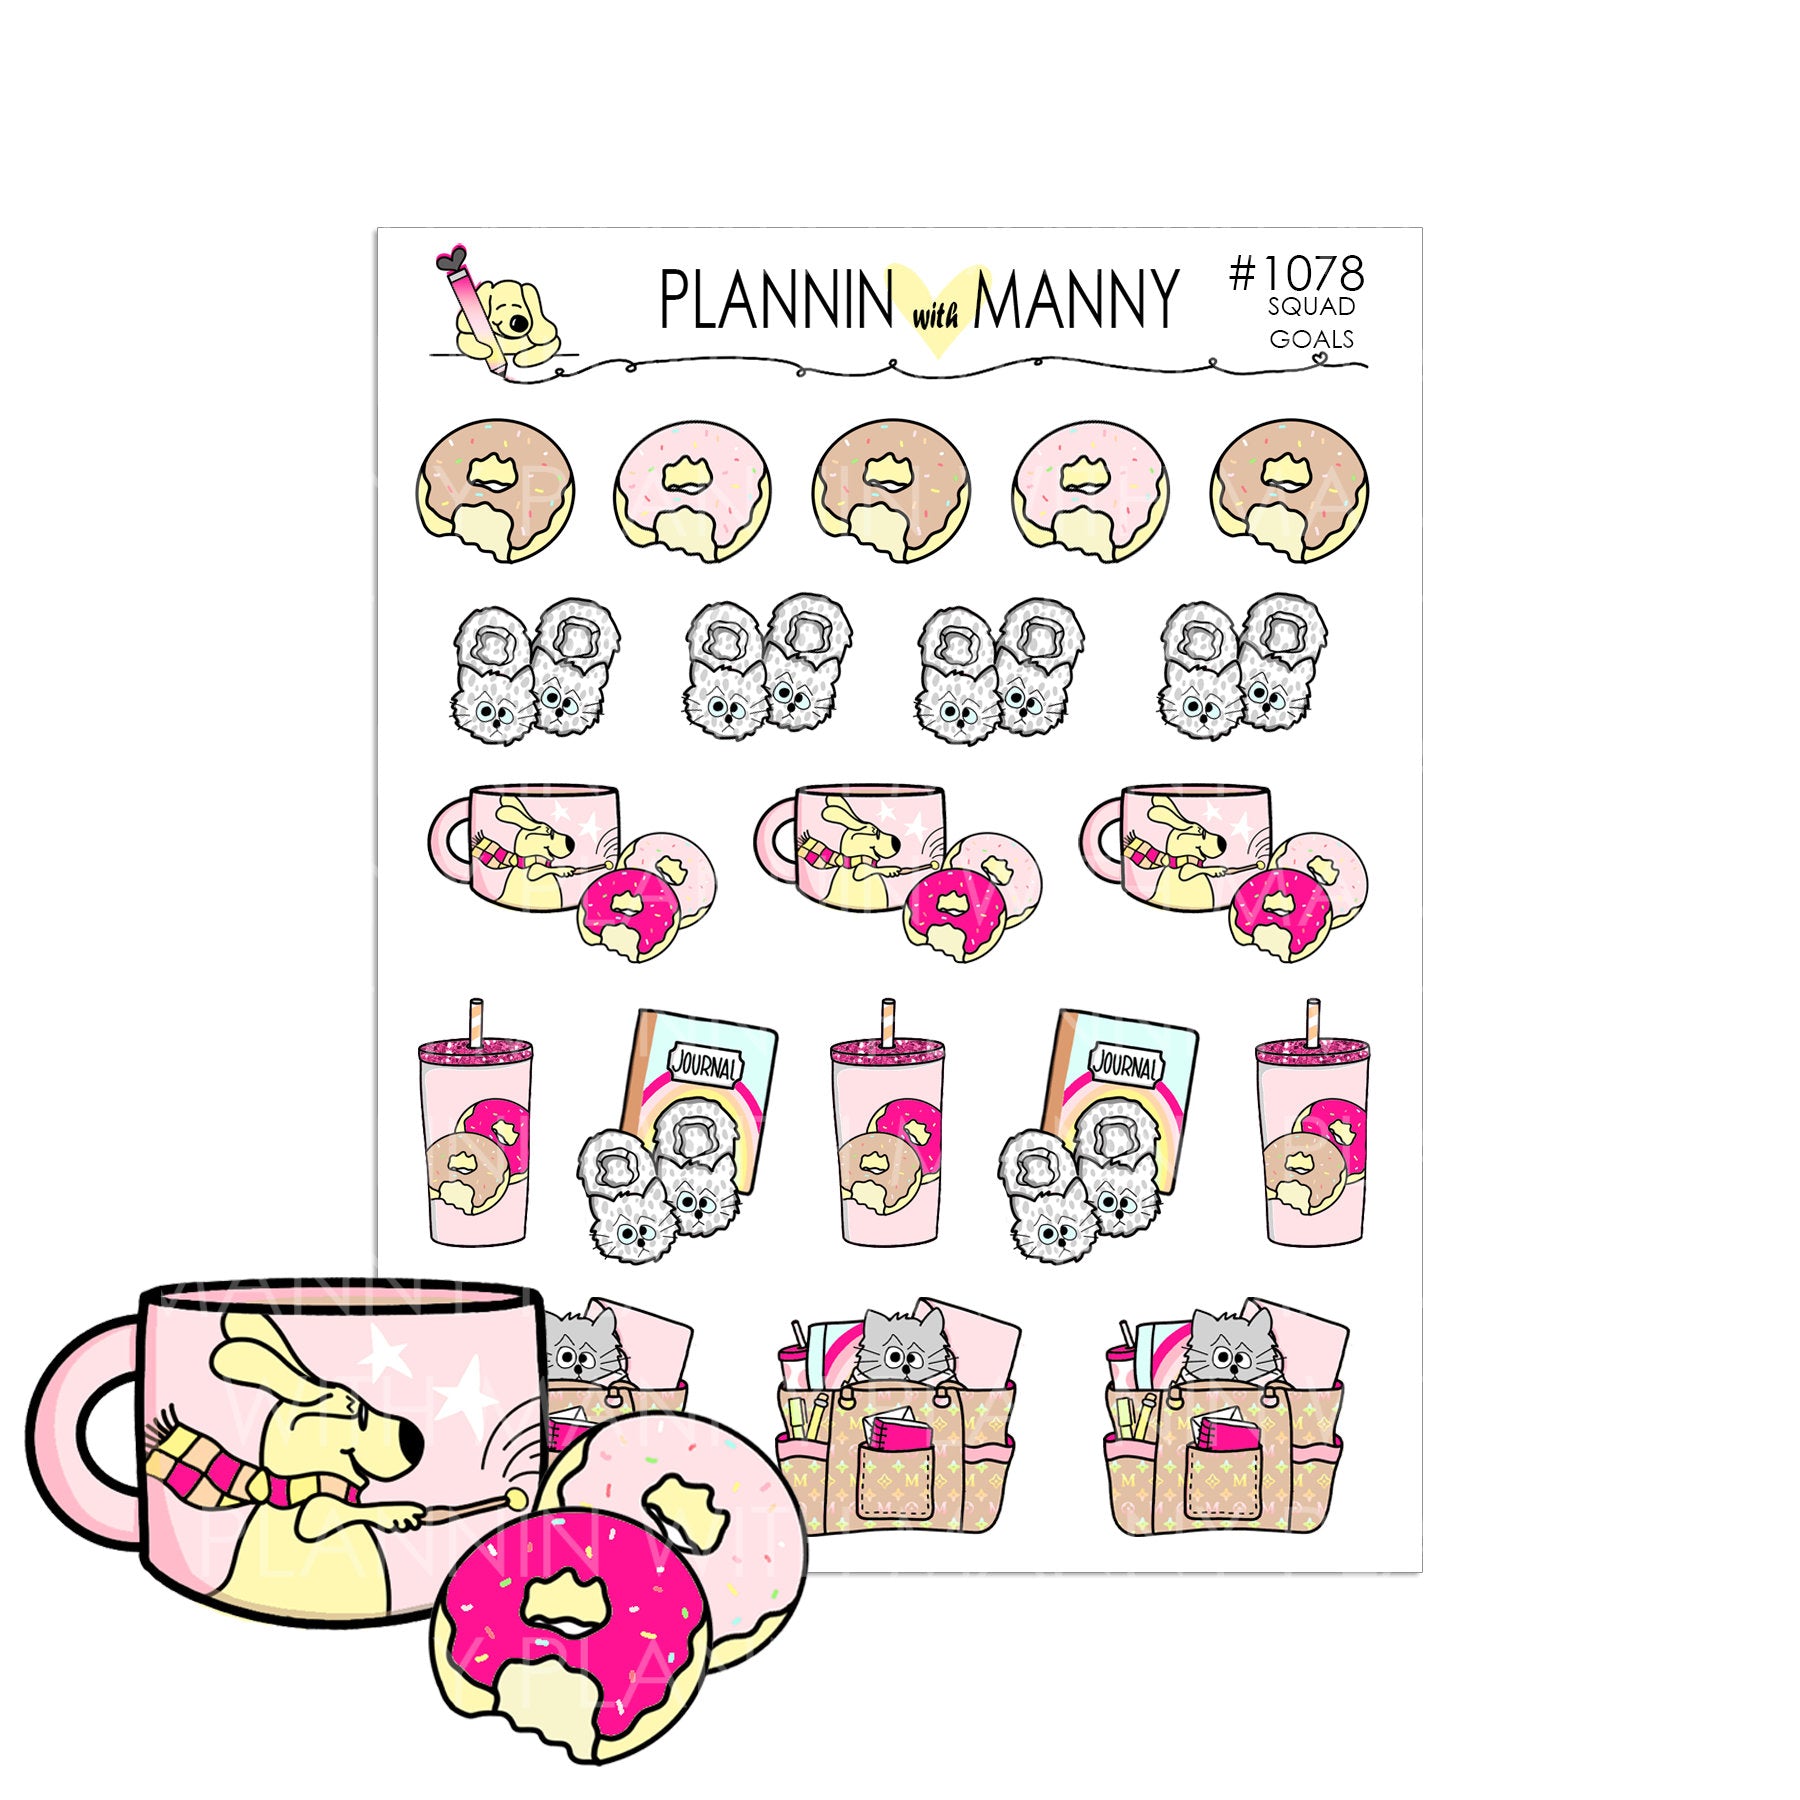 1078 SQUAD GOALS Planner Stickers - Squad Goals Collection